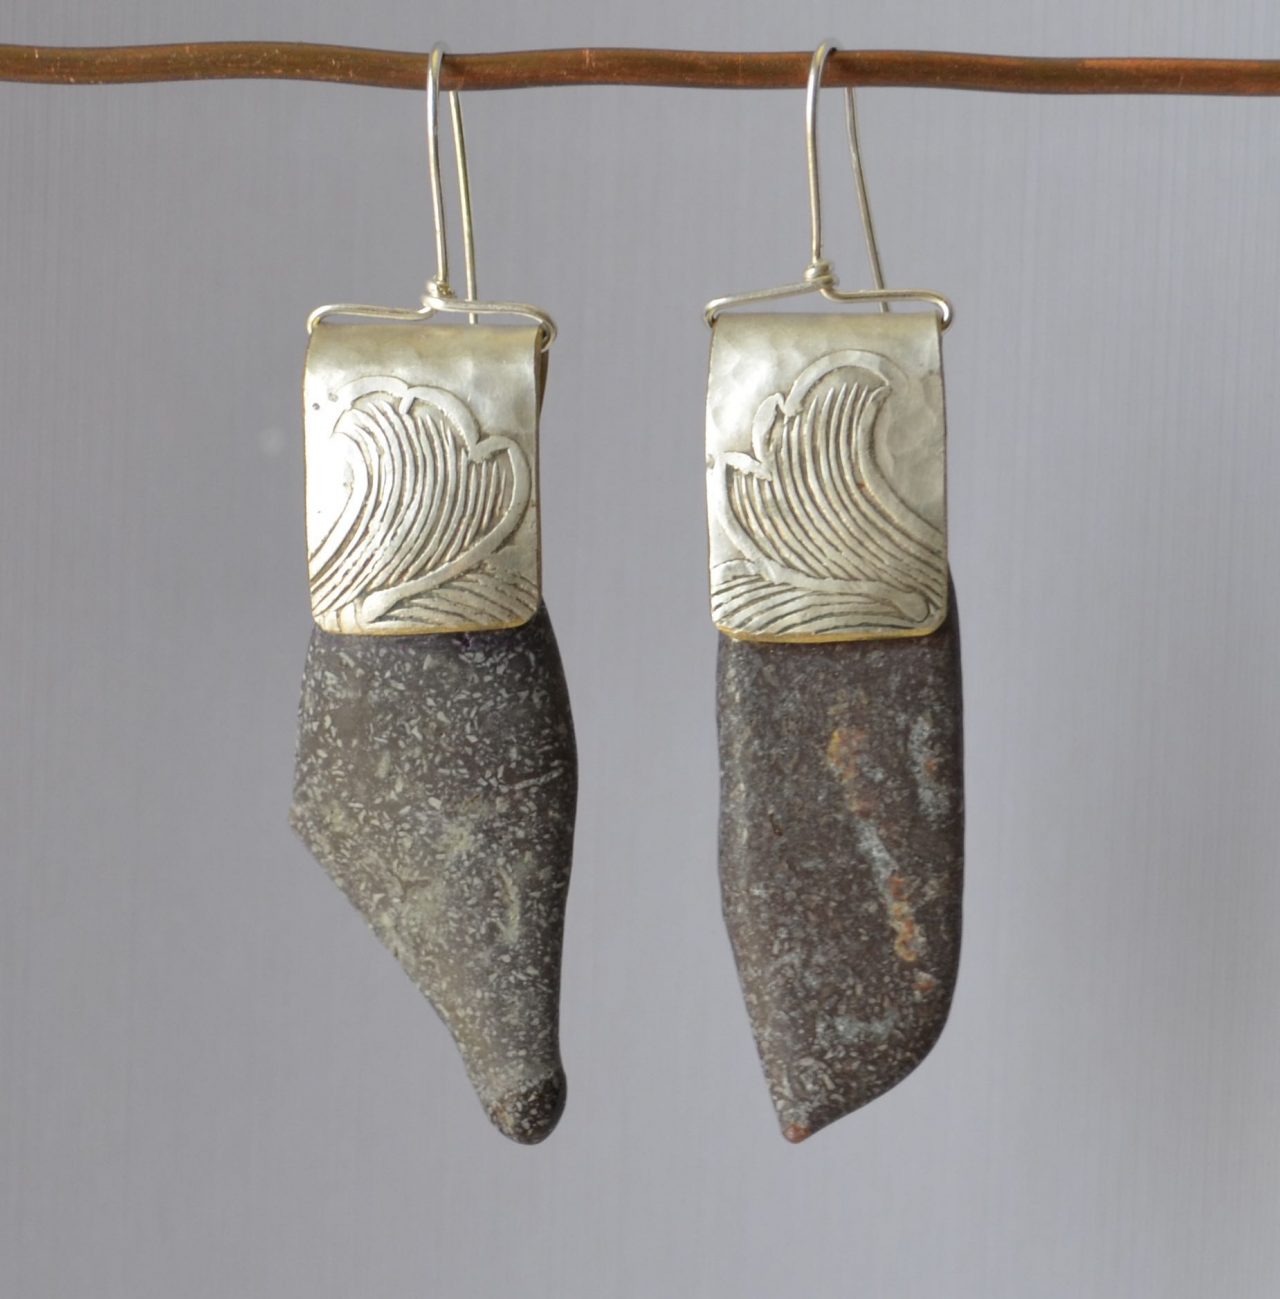 Fossilized Dinosaur Bone Earrings with Embossed Silver Plate